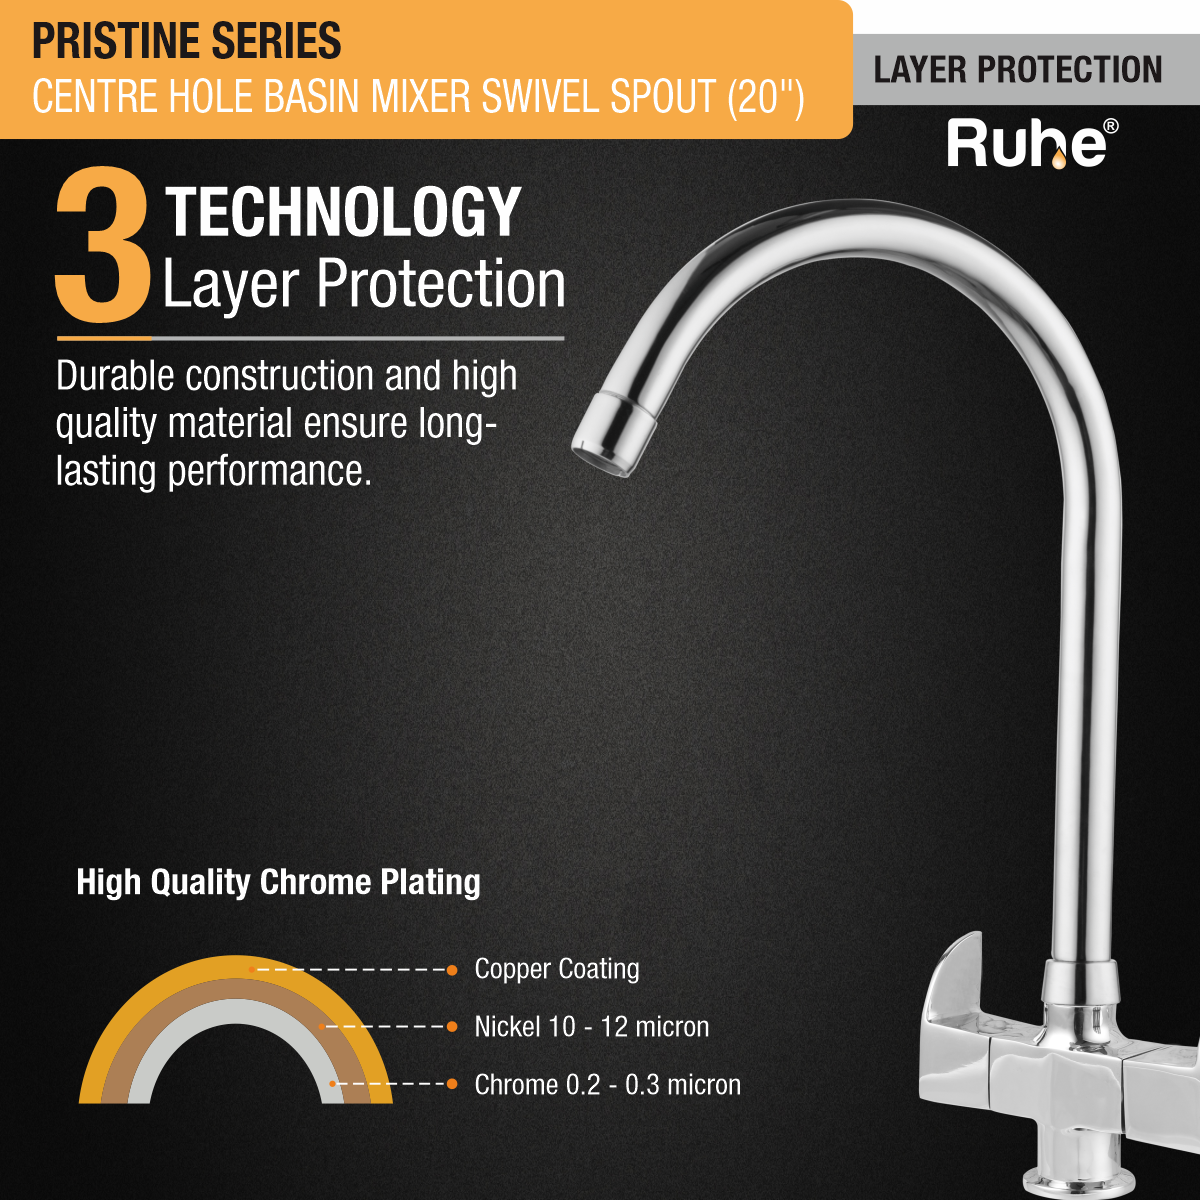 Pristine Centre Hole Basin Mixer with Large (20 inches) Round Swivel Spout Faucet 3 layer protection